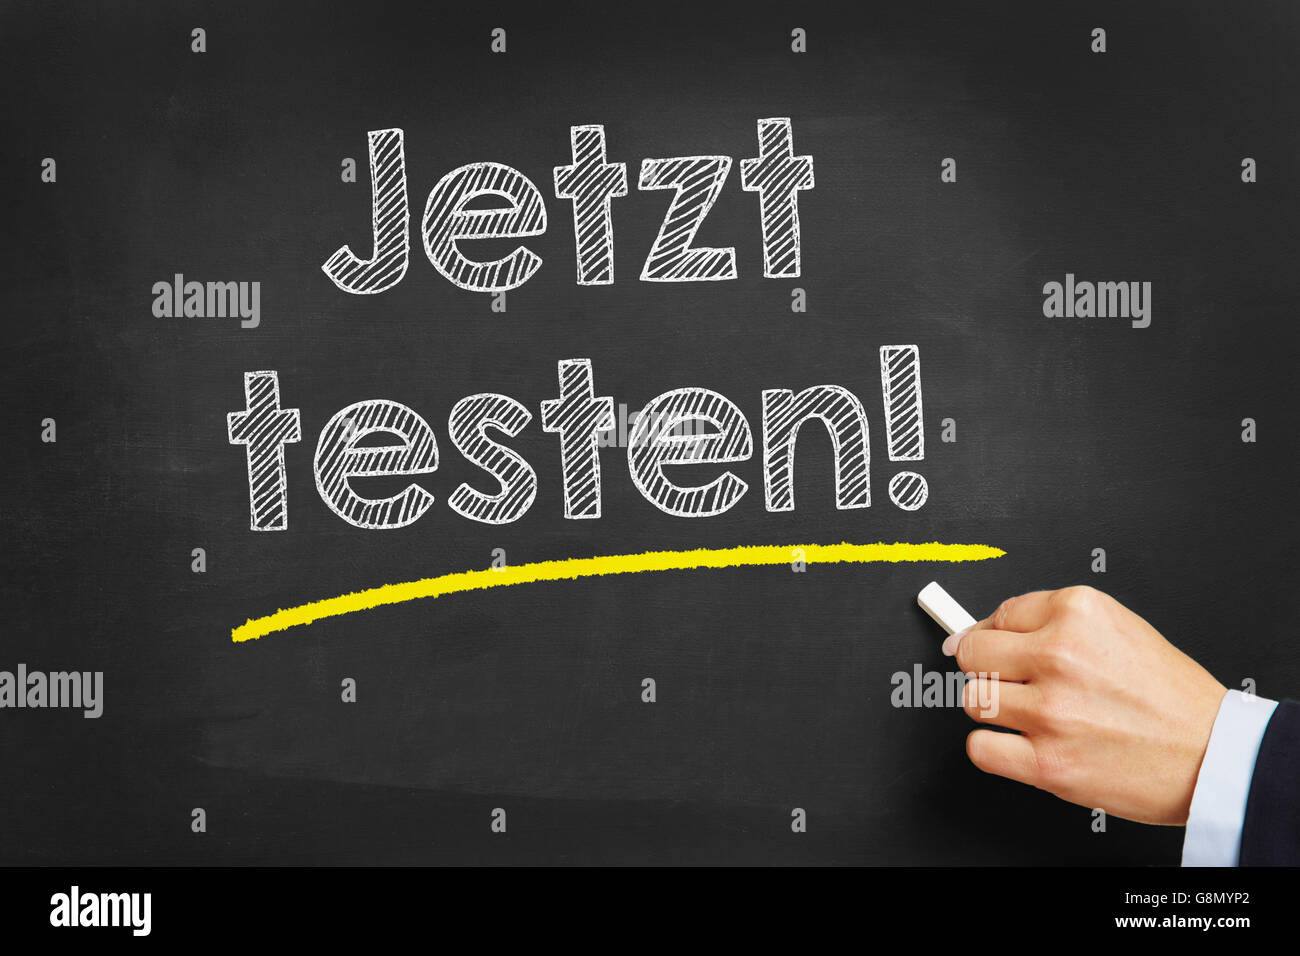 Hand with chalk writing in German 'Jetzt testen!' (test it now) on a chalkboard Stock Photo